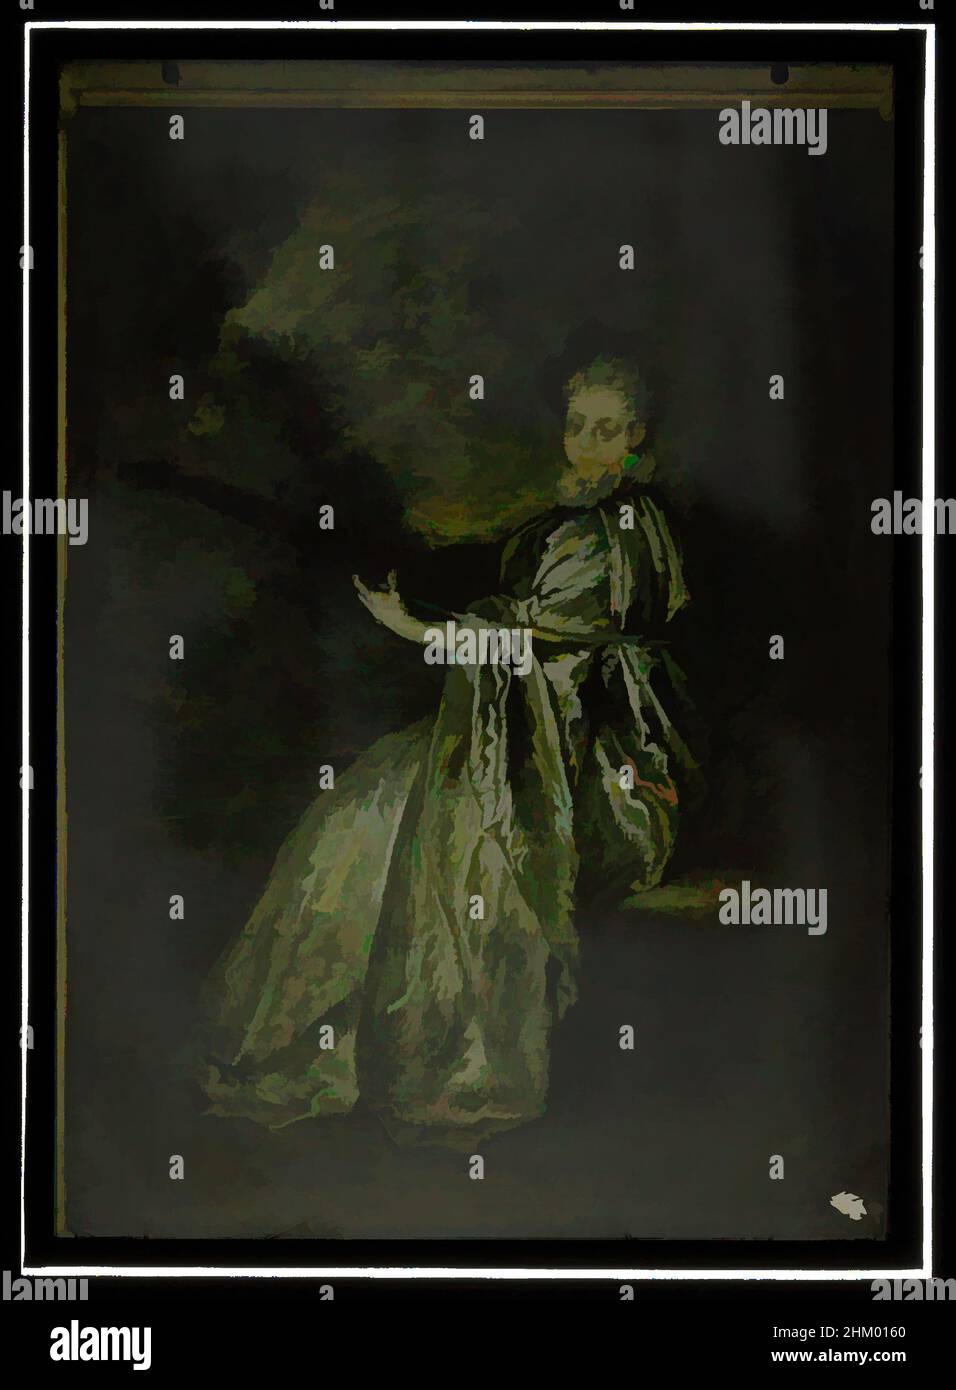 Art inspired by Reproduction of Antoine Watteau, La Finette, Louvre, after: Jean Antoine Watteau, 1907 - 1935, glass, slide, height 130 mm × width 180 mm, Classic works modernized by Artotop with a splash of modernity. Shapes, color and value, eye-catching visual impact on art. Emotions through freedom of artworks in a contemporary way. A timeless message pursuing a wildly creative new direction. Artists turning to the digital medium and creating the Artotop NFT Stock Photo